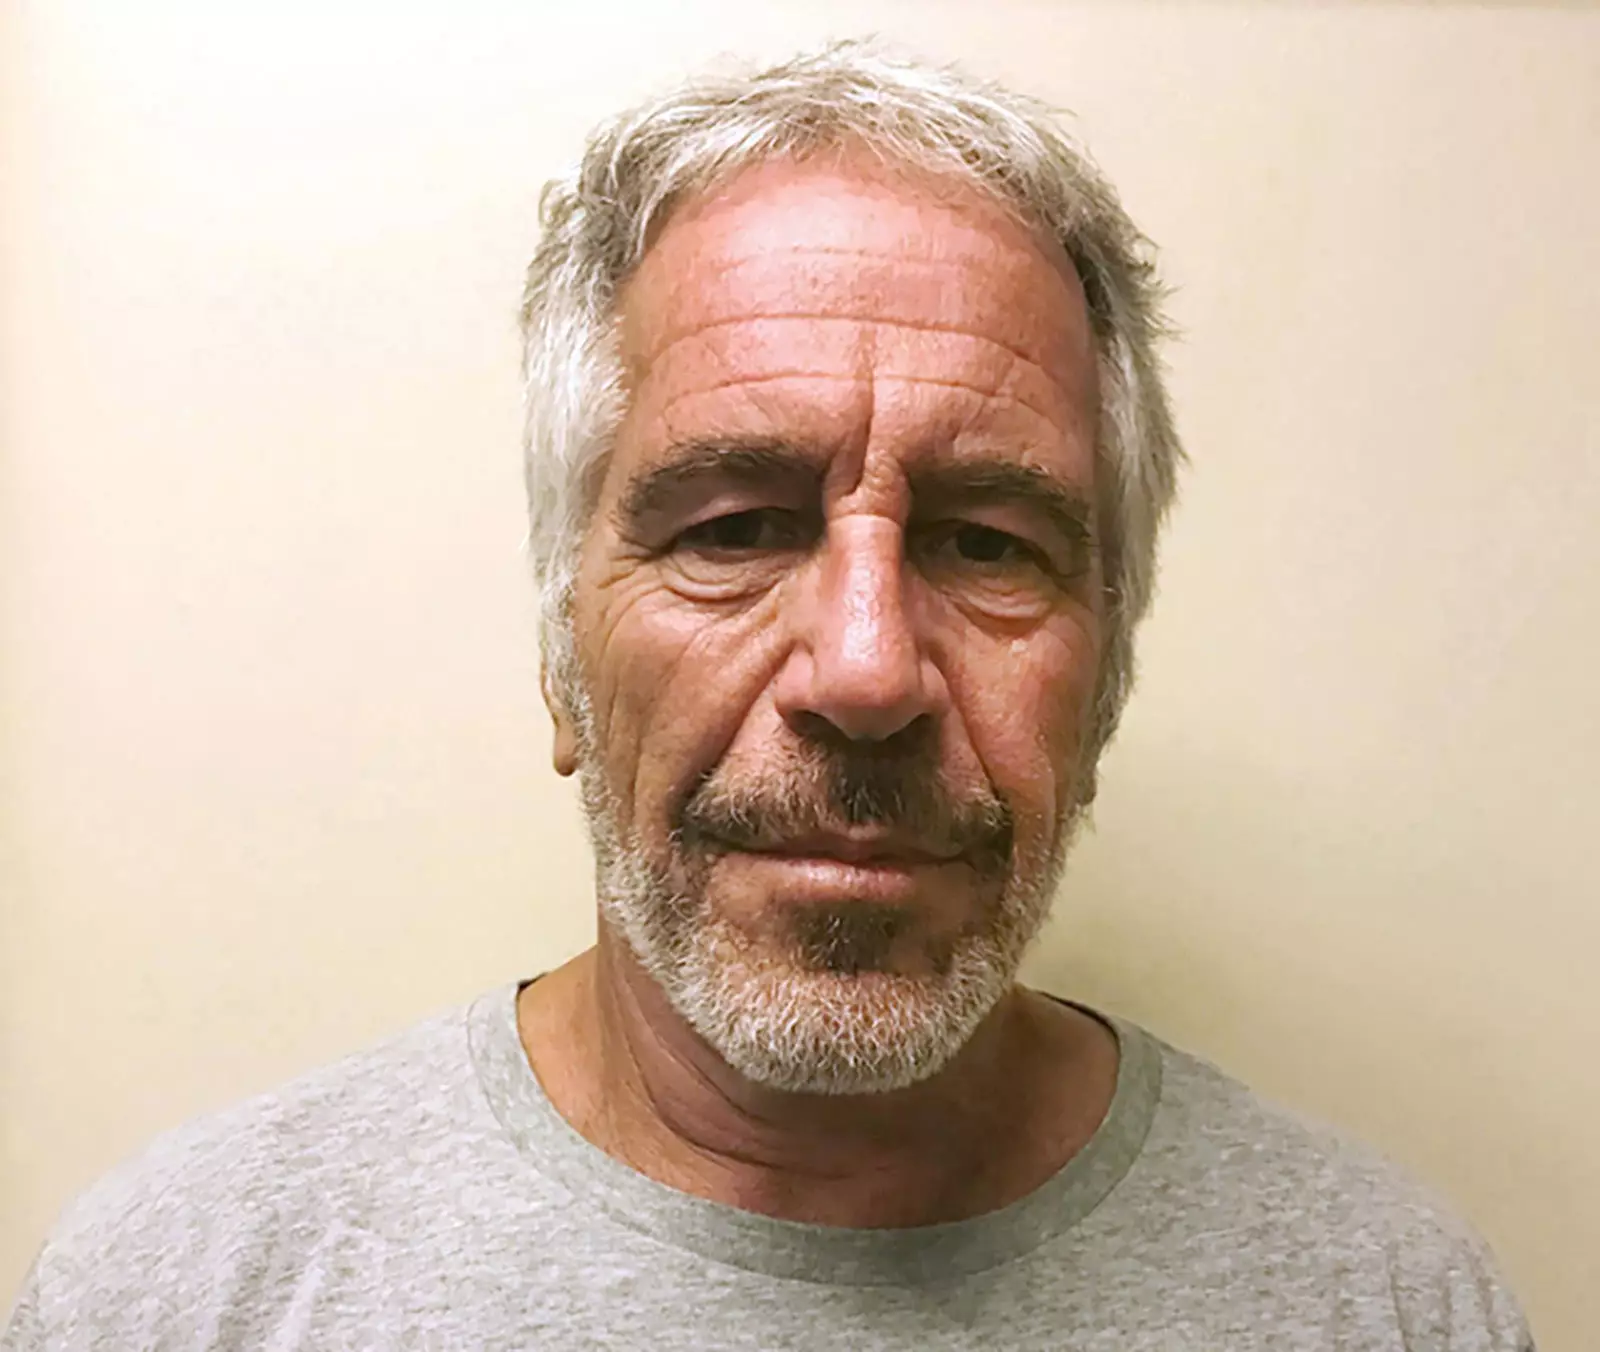 The music producer accidentally thanks deceased paedophile Jeffrey Epstein for his award.